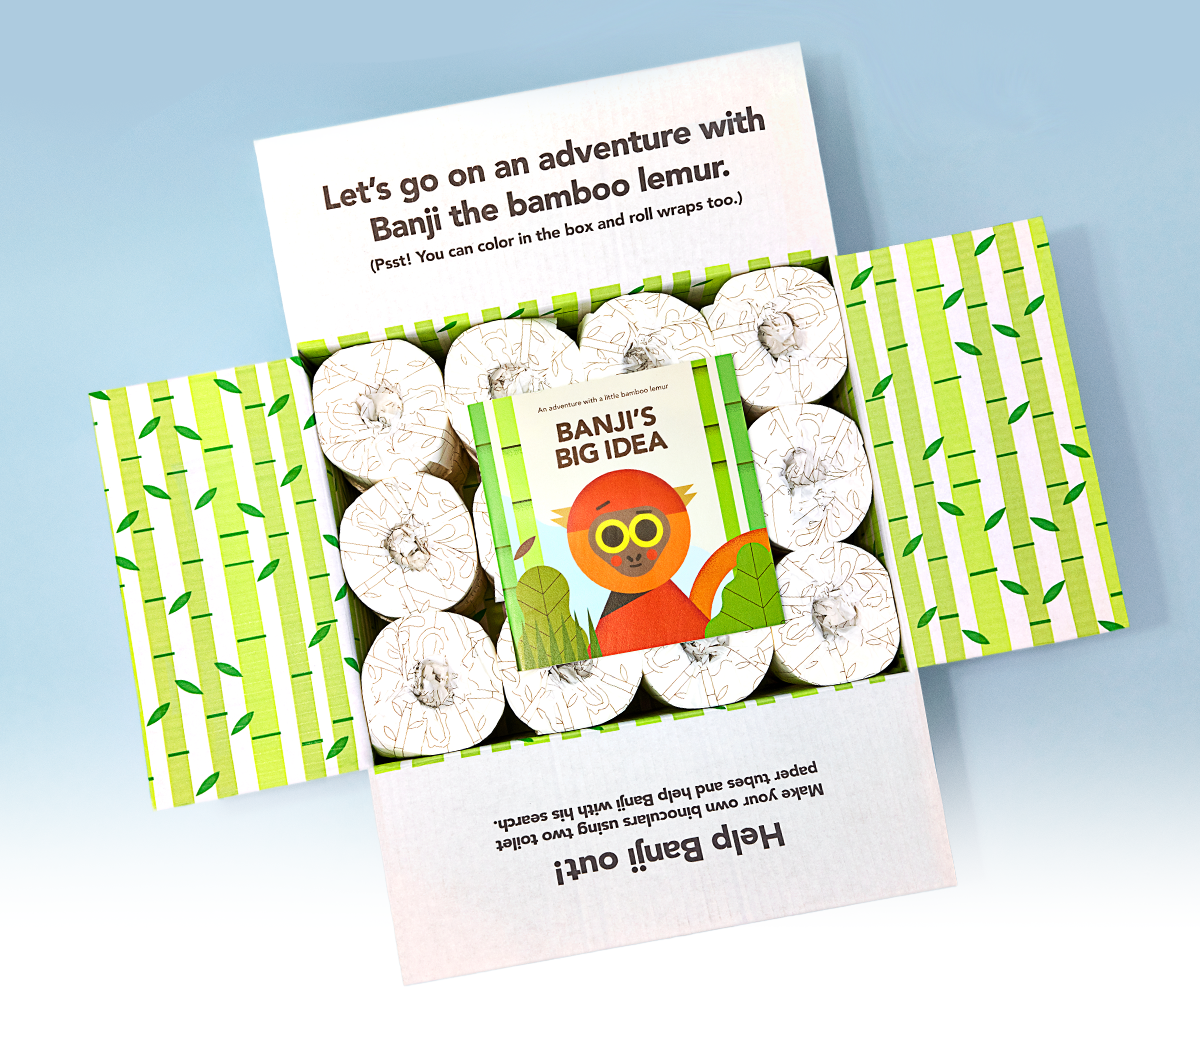 Reel Paper: Introducing our limited-edition Little Lemurs Box